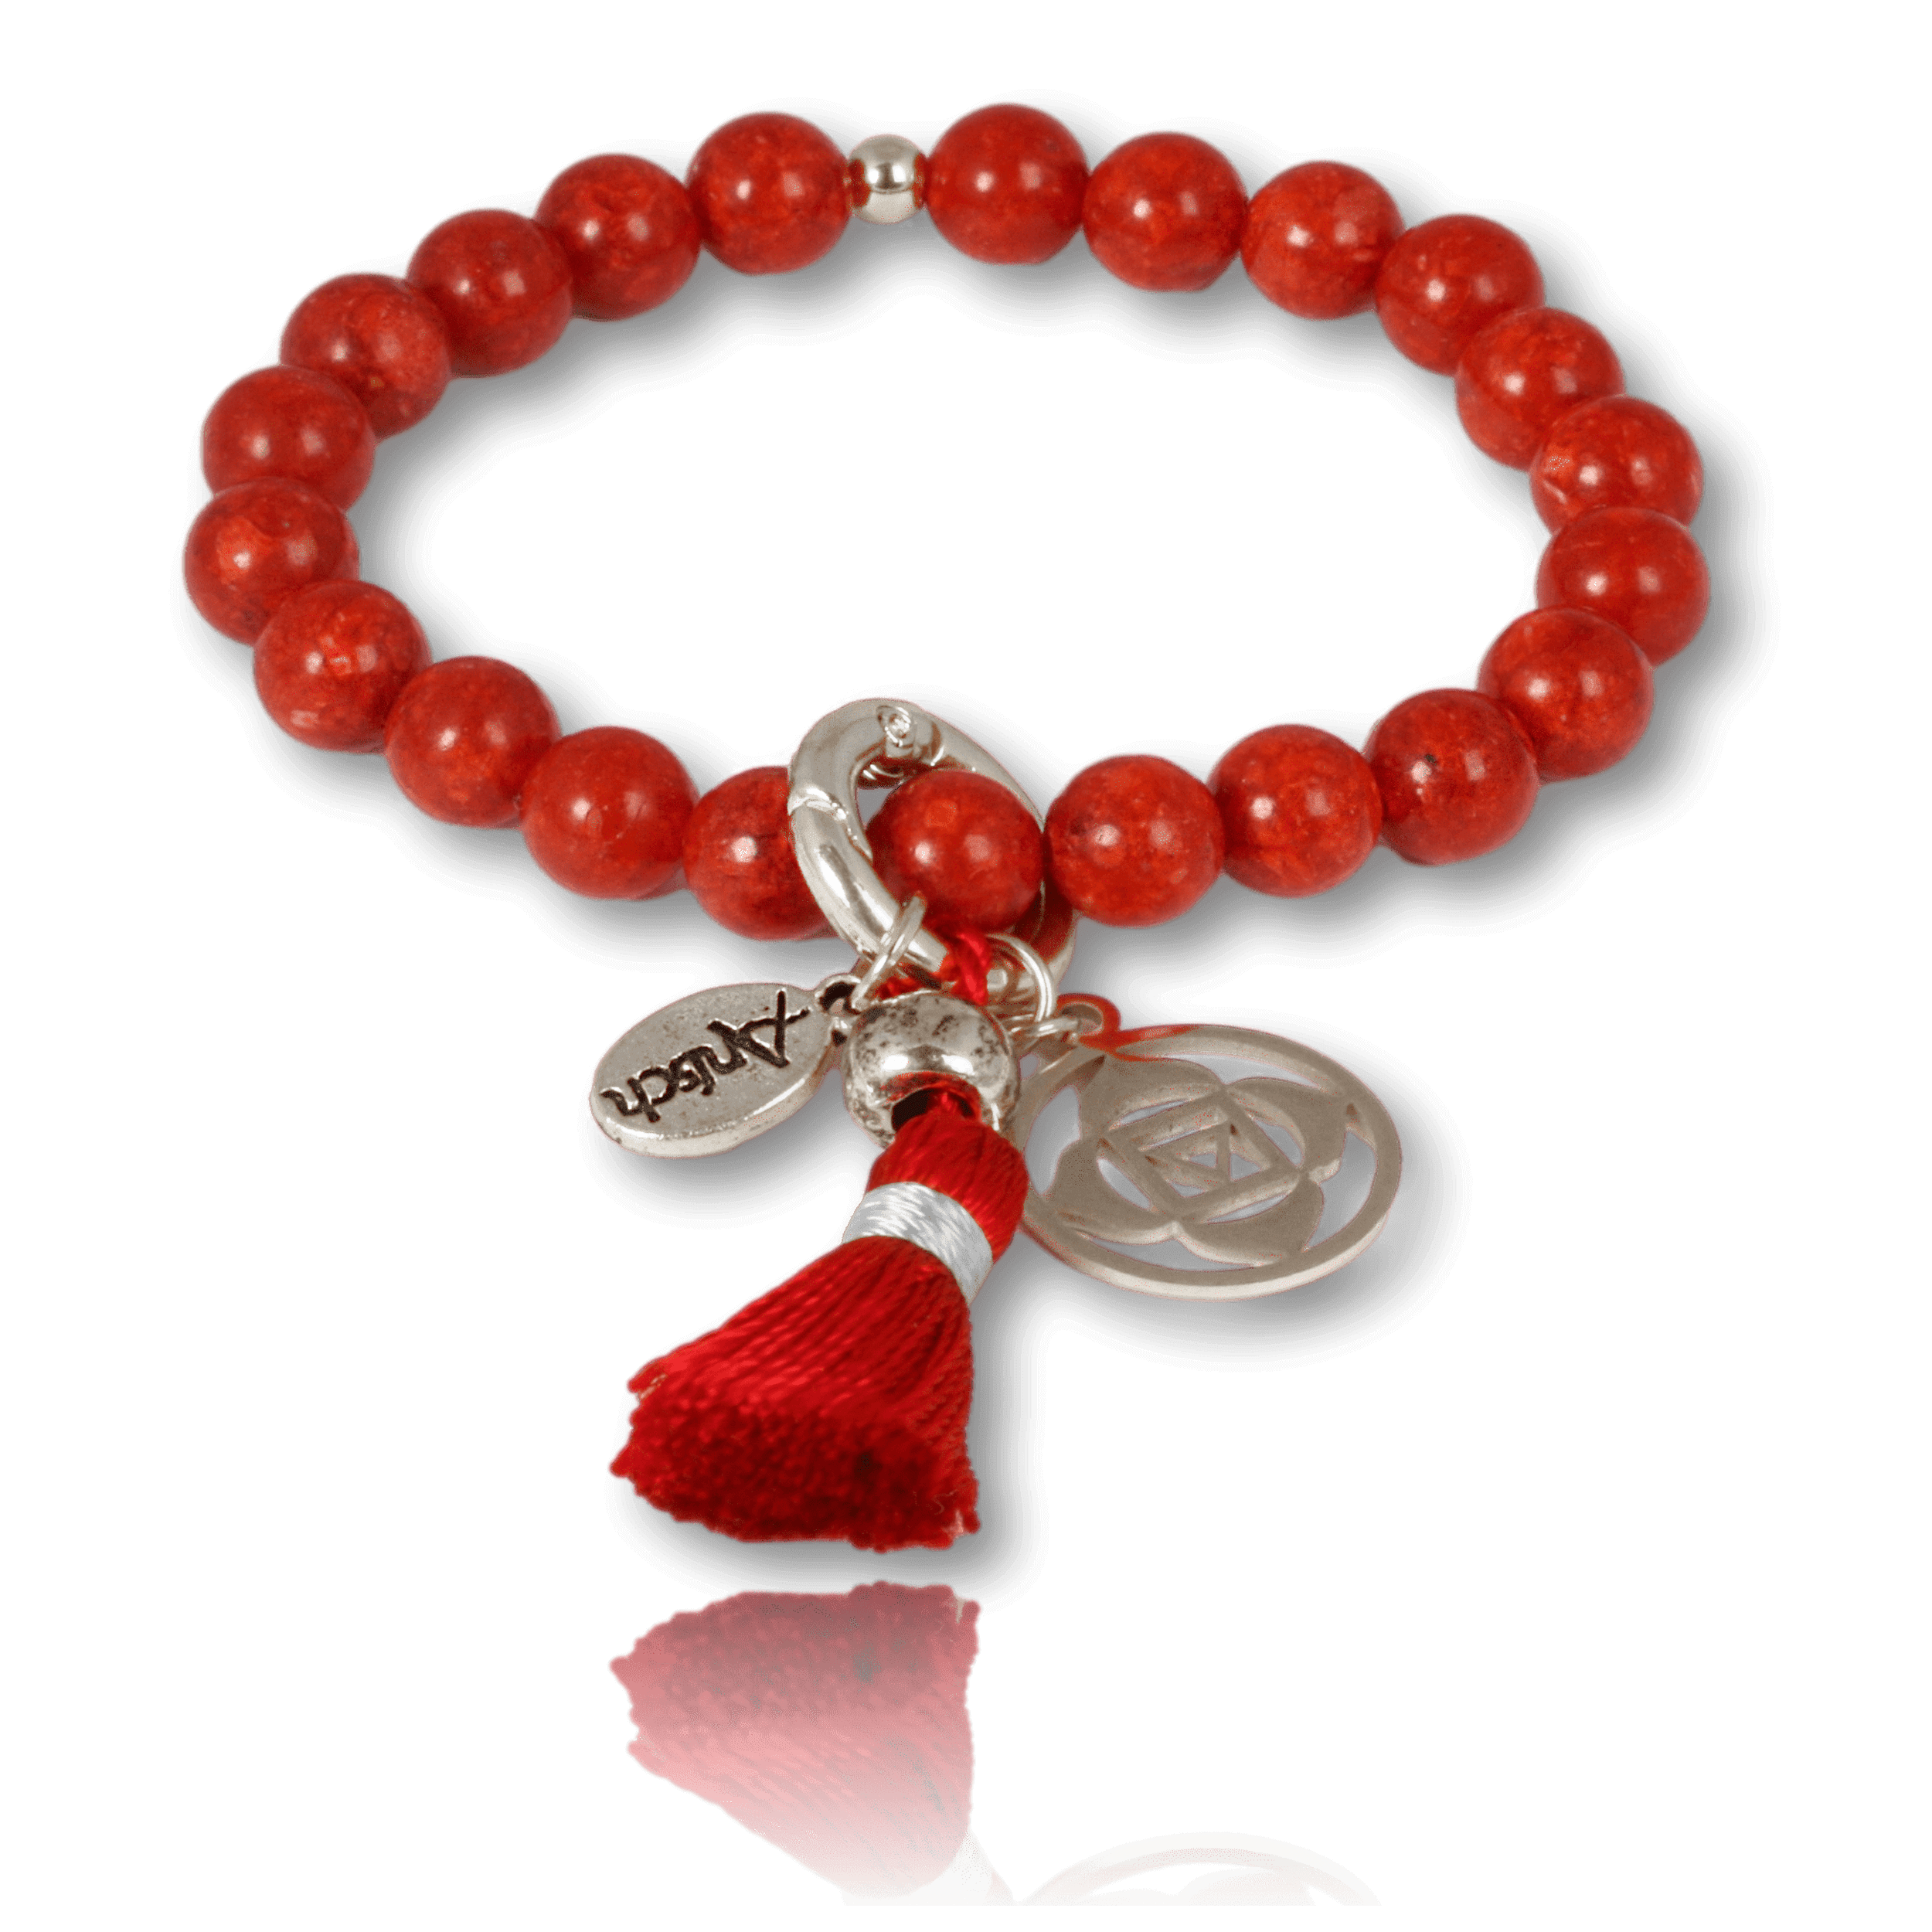 Coral gemstone bracelet silver-plated for your root chakra: grounding & basic trust